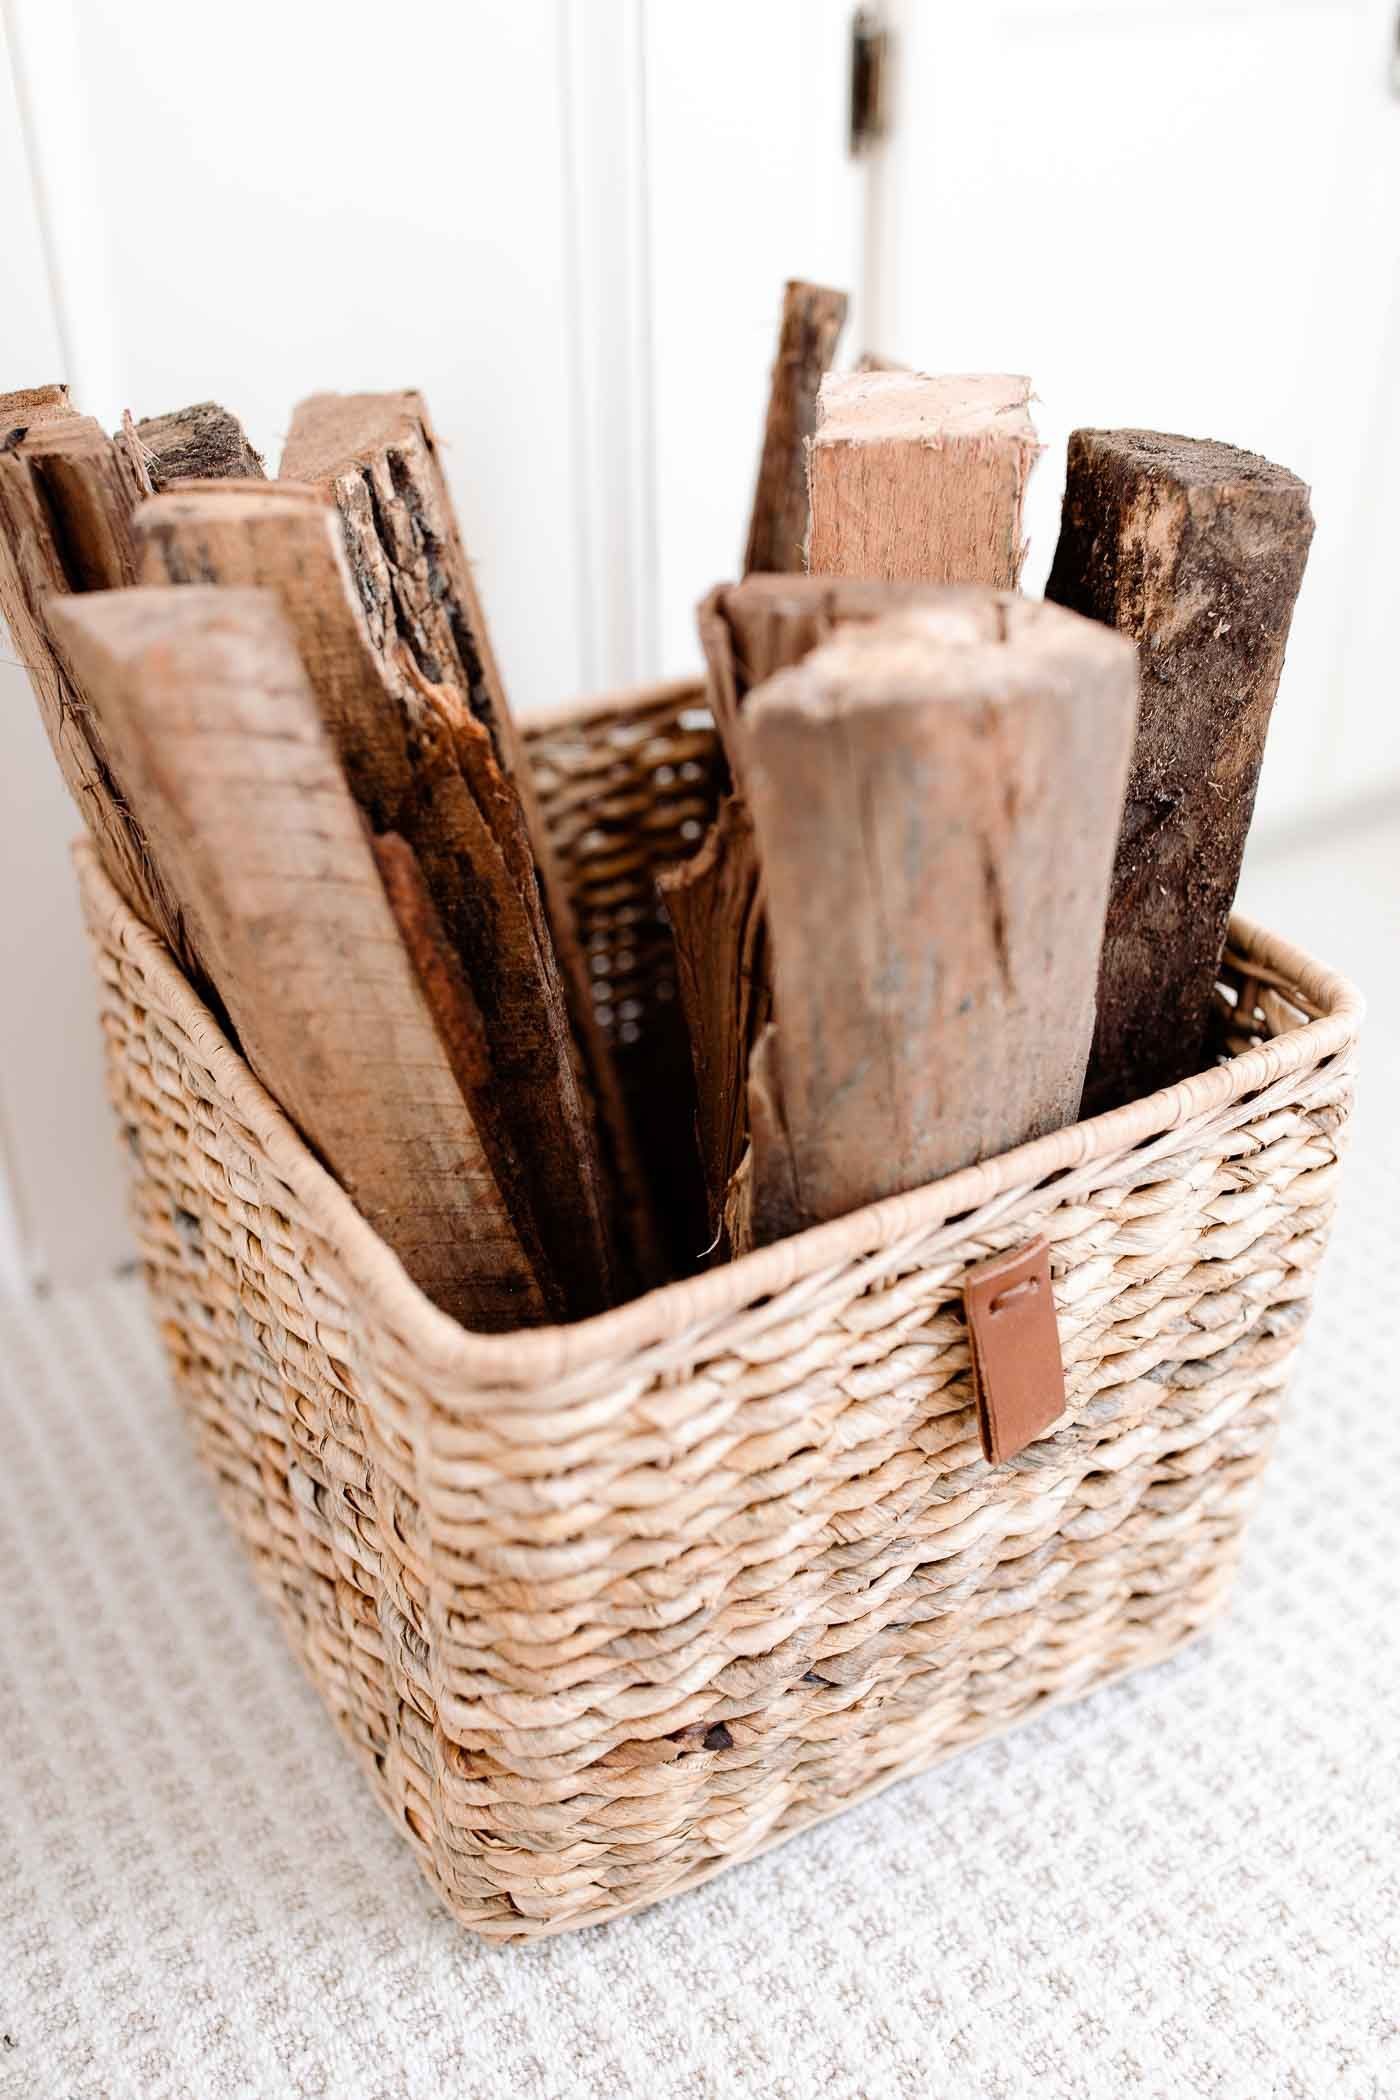 Firewood in a basket in front of a fireplace